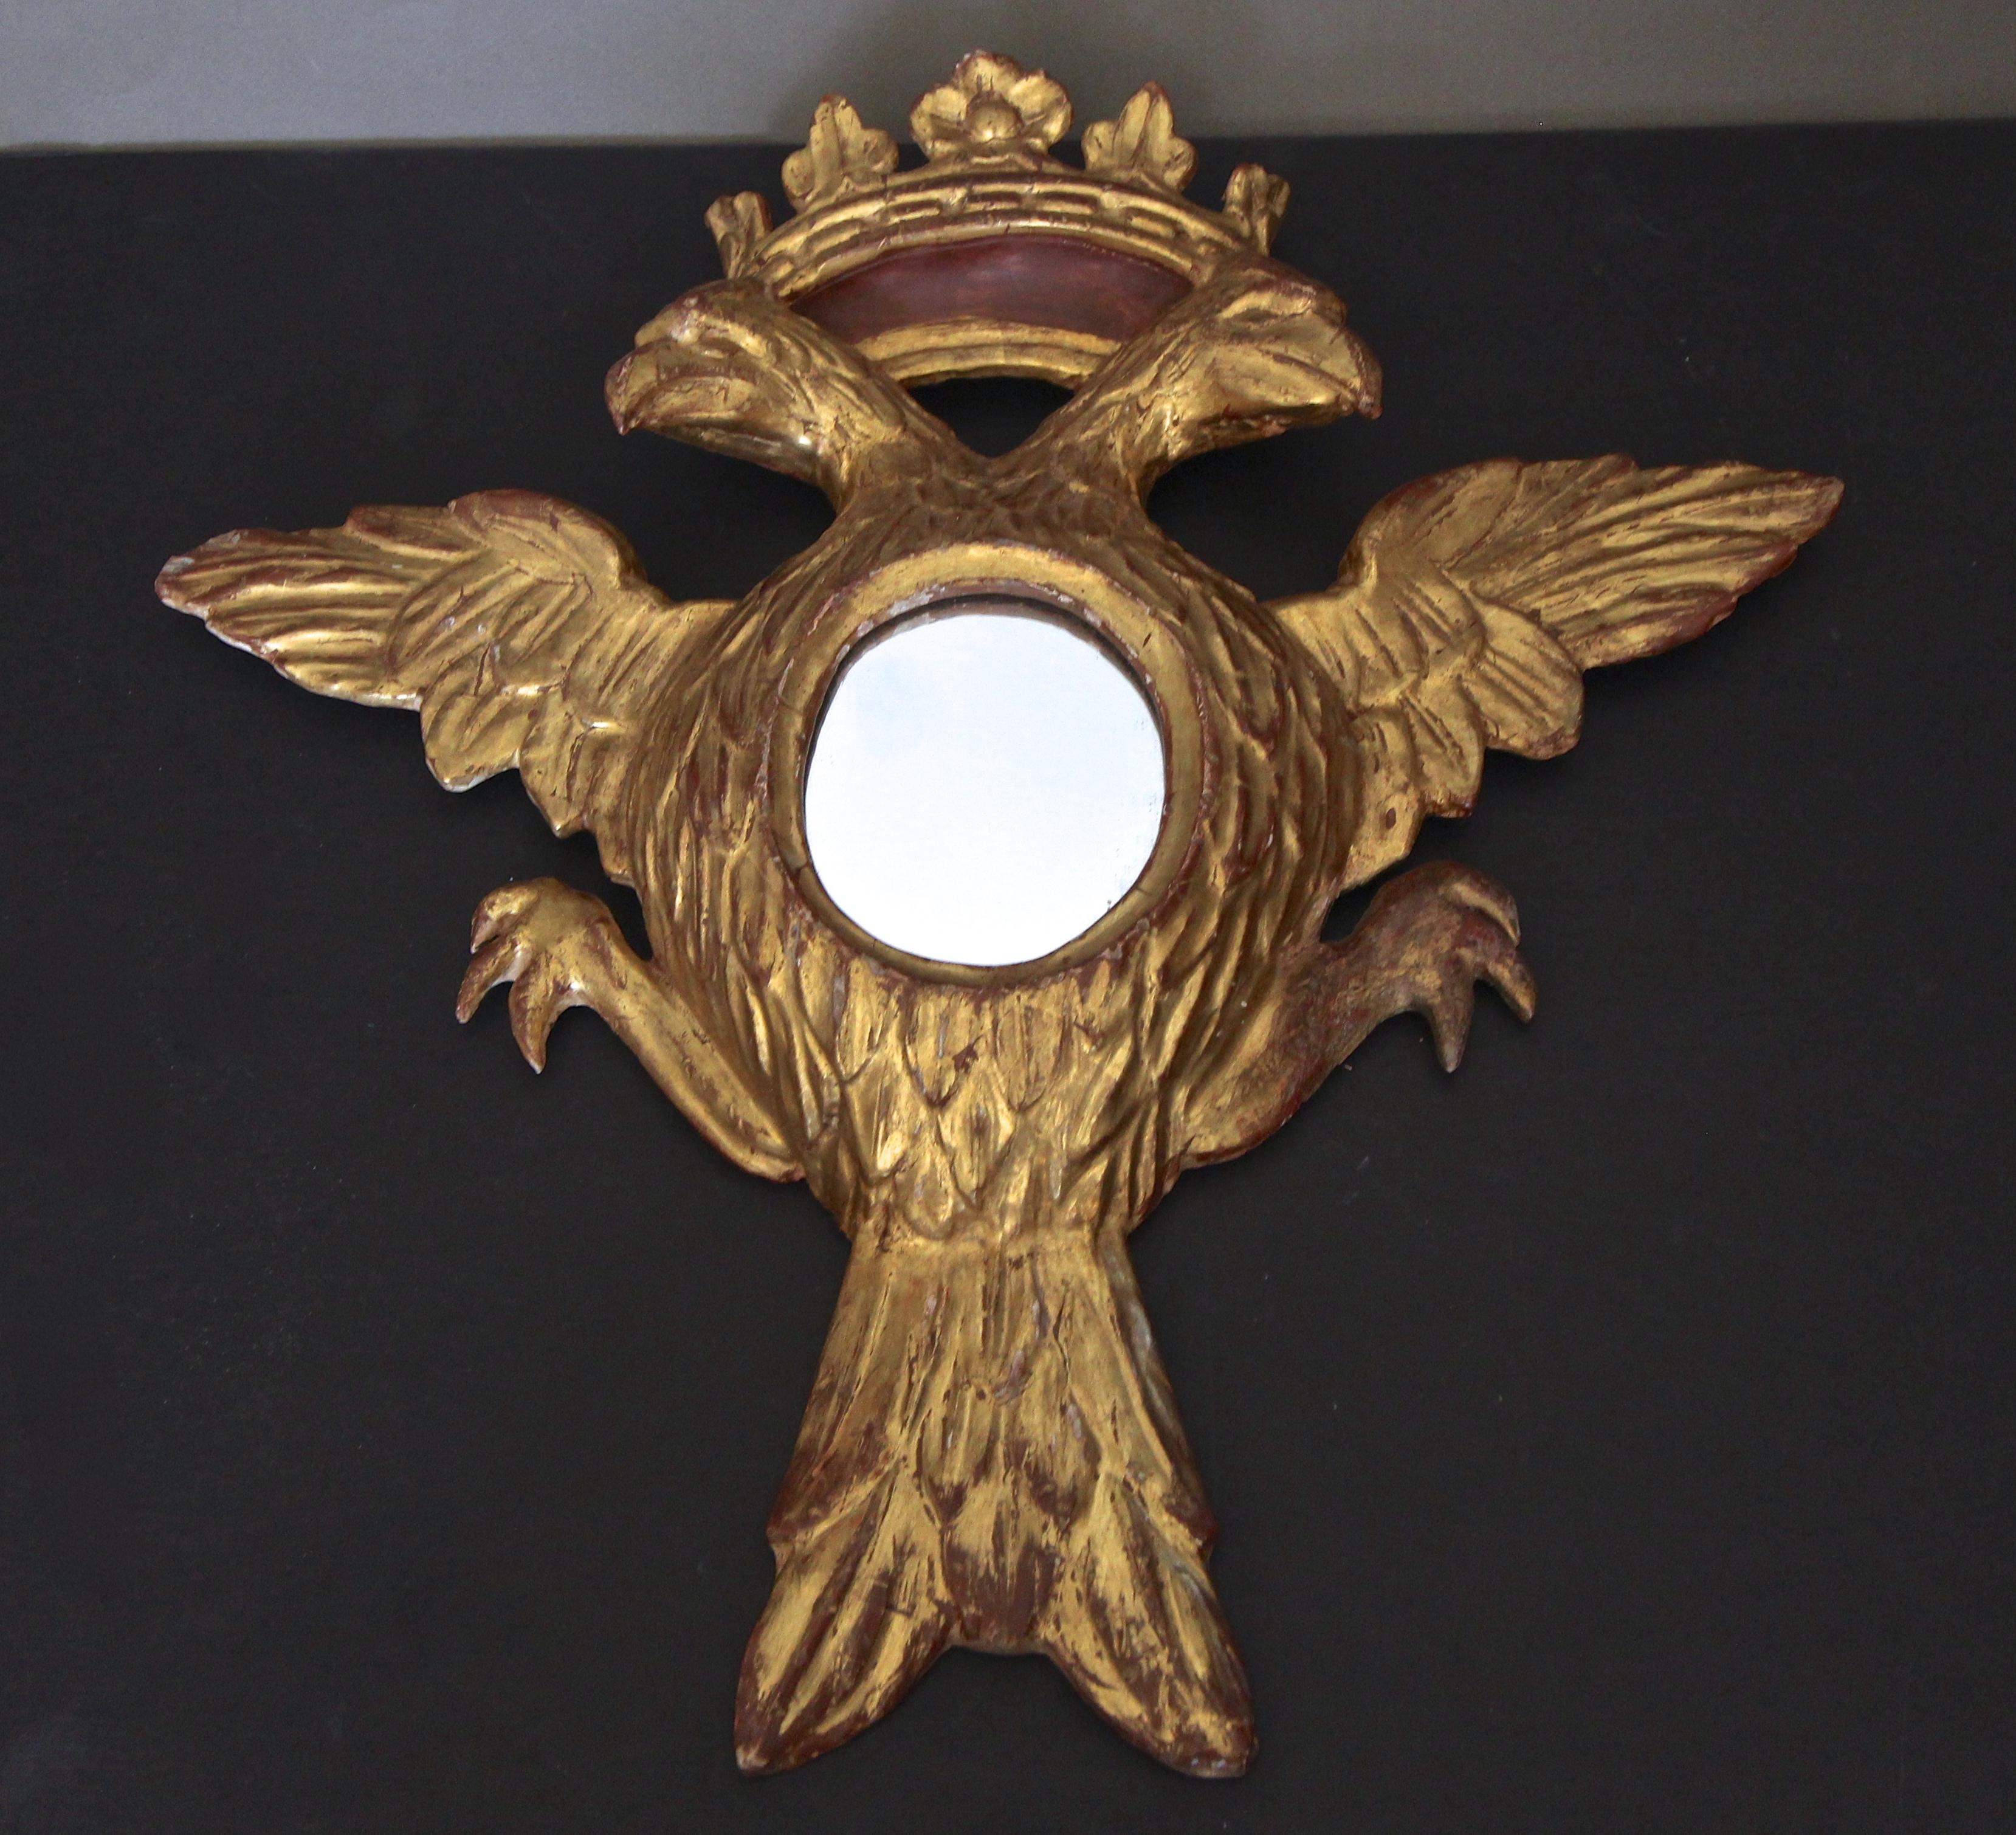 eagle with crest on head